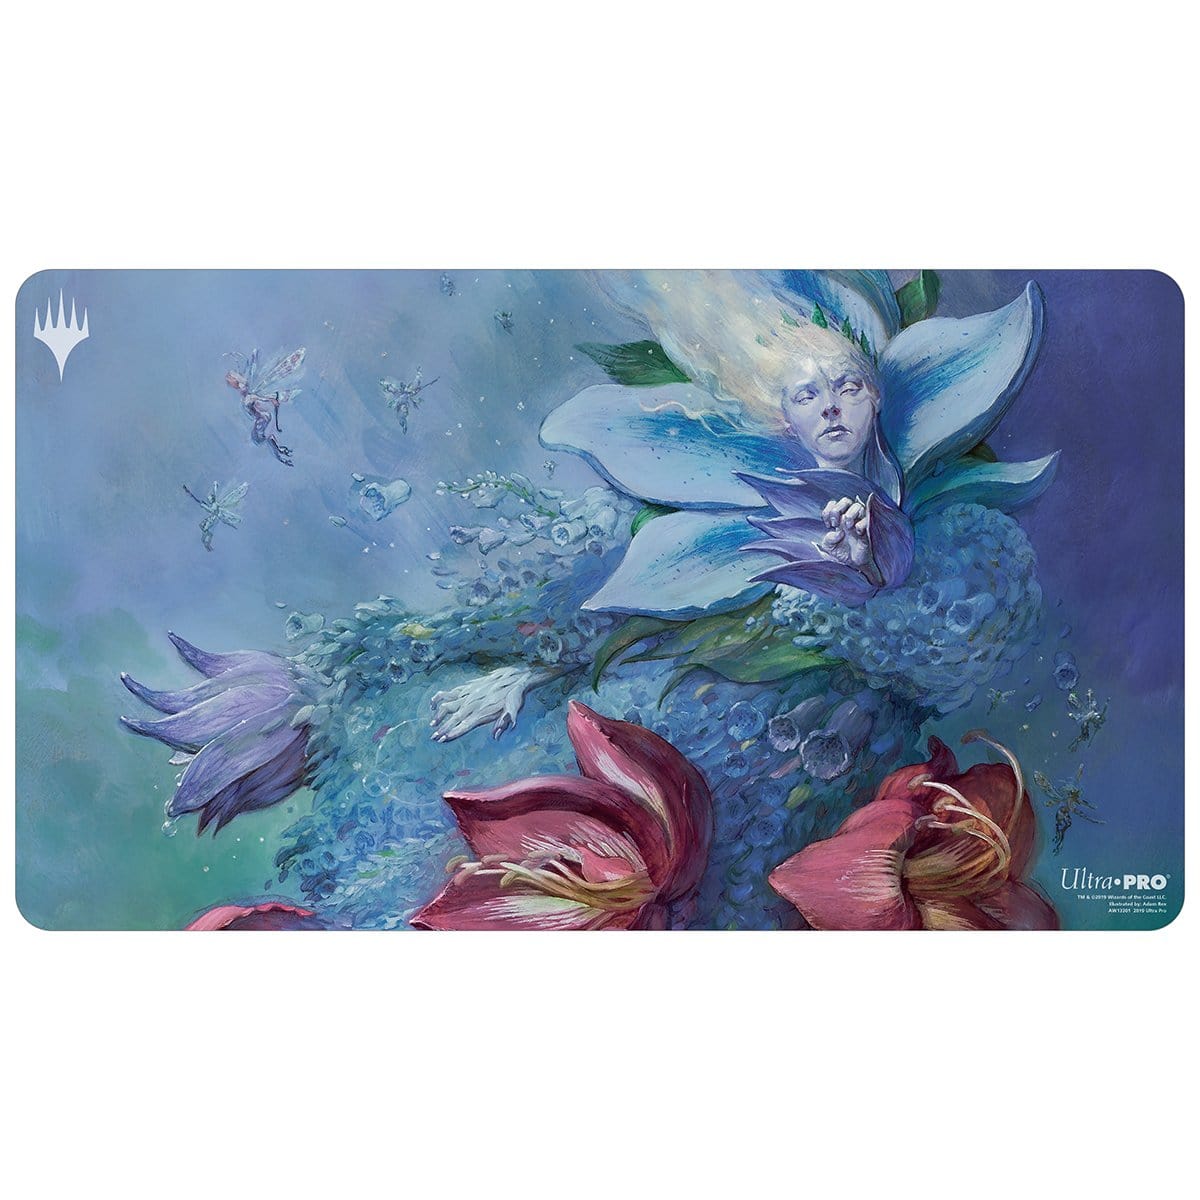 Oona, Queen of the Fae Playmat - Playmat - Original Magic Art - Accessories for Magic the Gathering and other card games